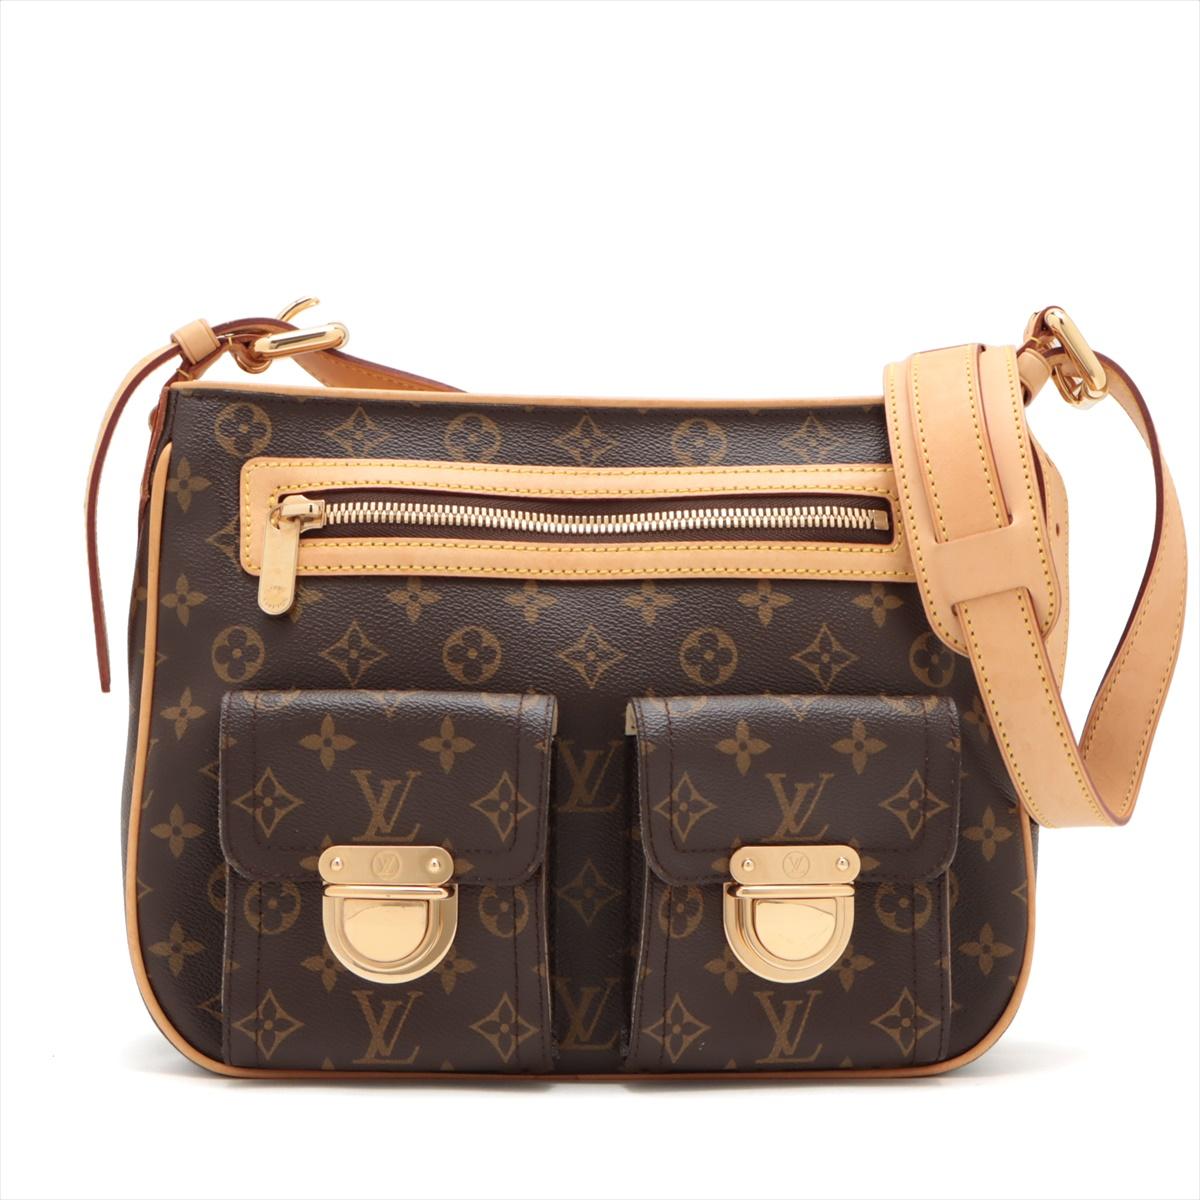 The Louis Vuitton Monogram Hudson GM Shoulder Bag is a striking and versatile accessory that seamlessly combines the iconic Monogram canvas with a functional and contemporary design. The Monogram canvas, featuring the renowned LV pattern, forms the